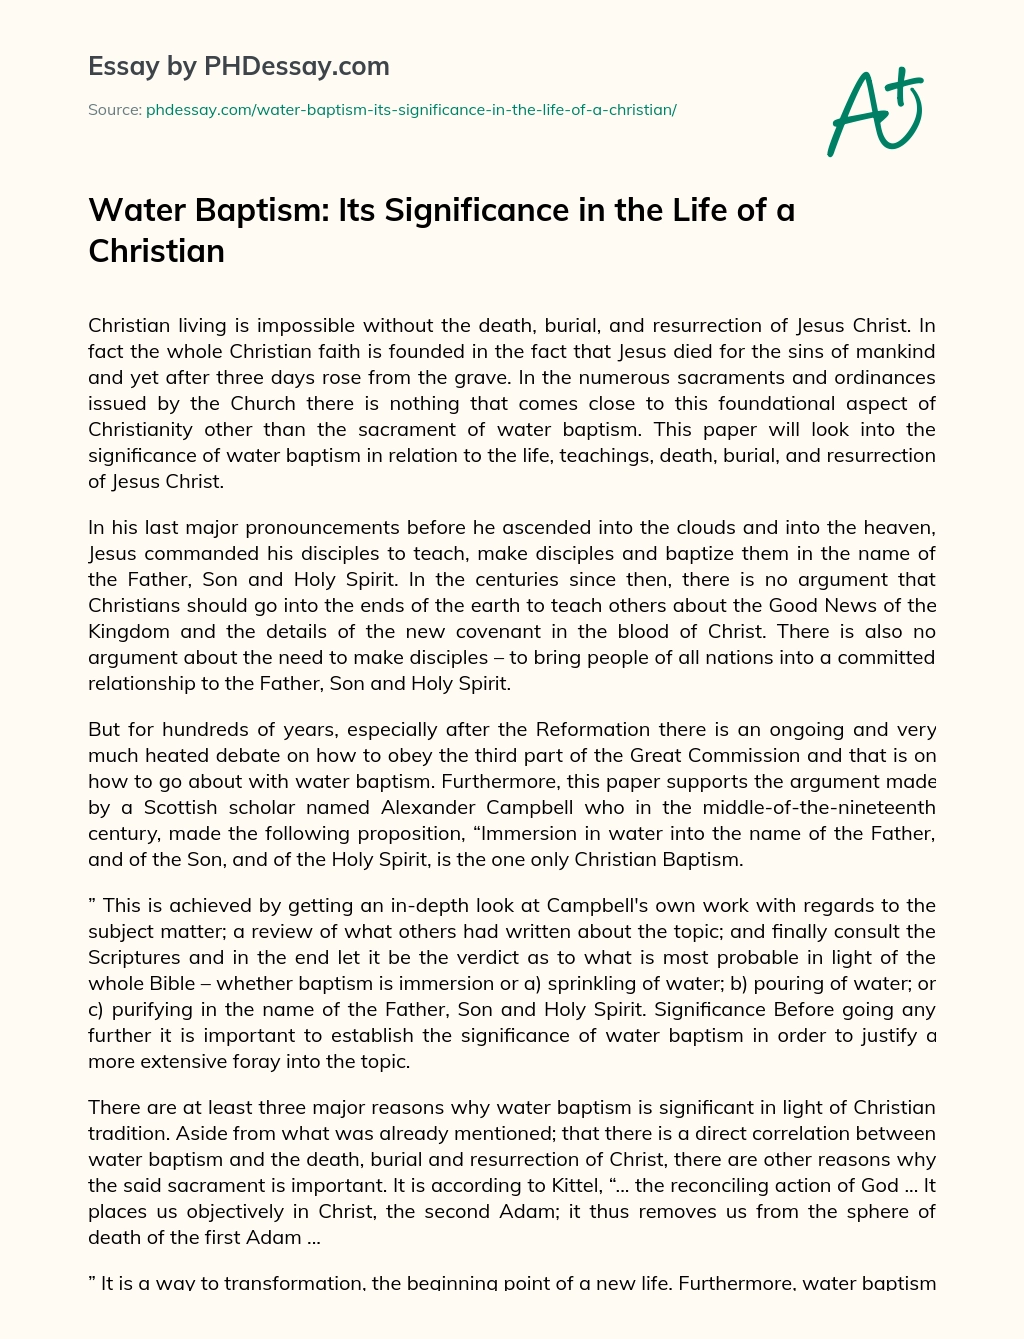 Water Baptism: Its Significance in the Life of a Christian essay